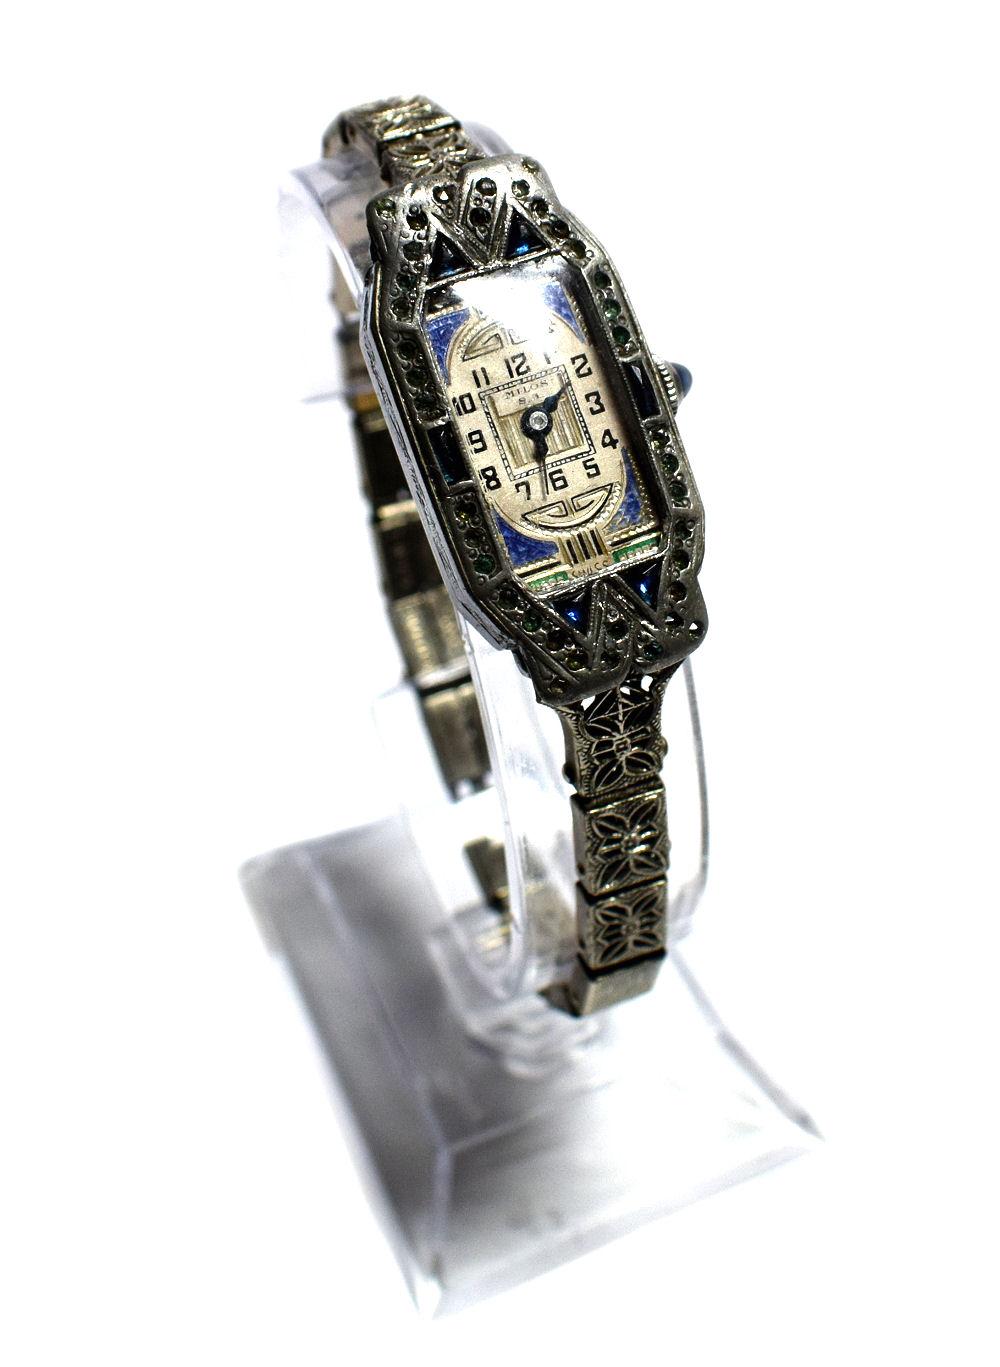 Women's 1930s Art Deco Ladies Sapphire Marcasite Enamel Watch with a Filigree Band